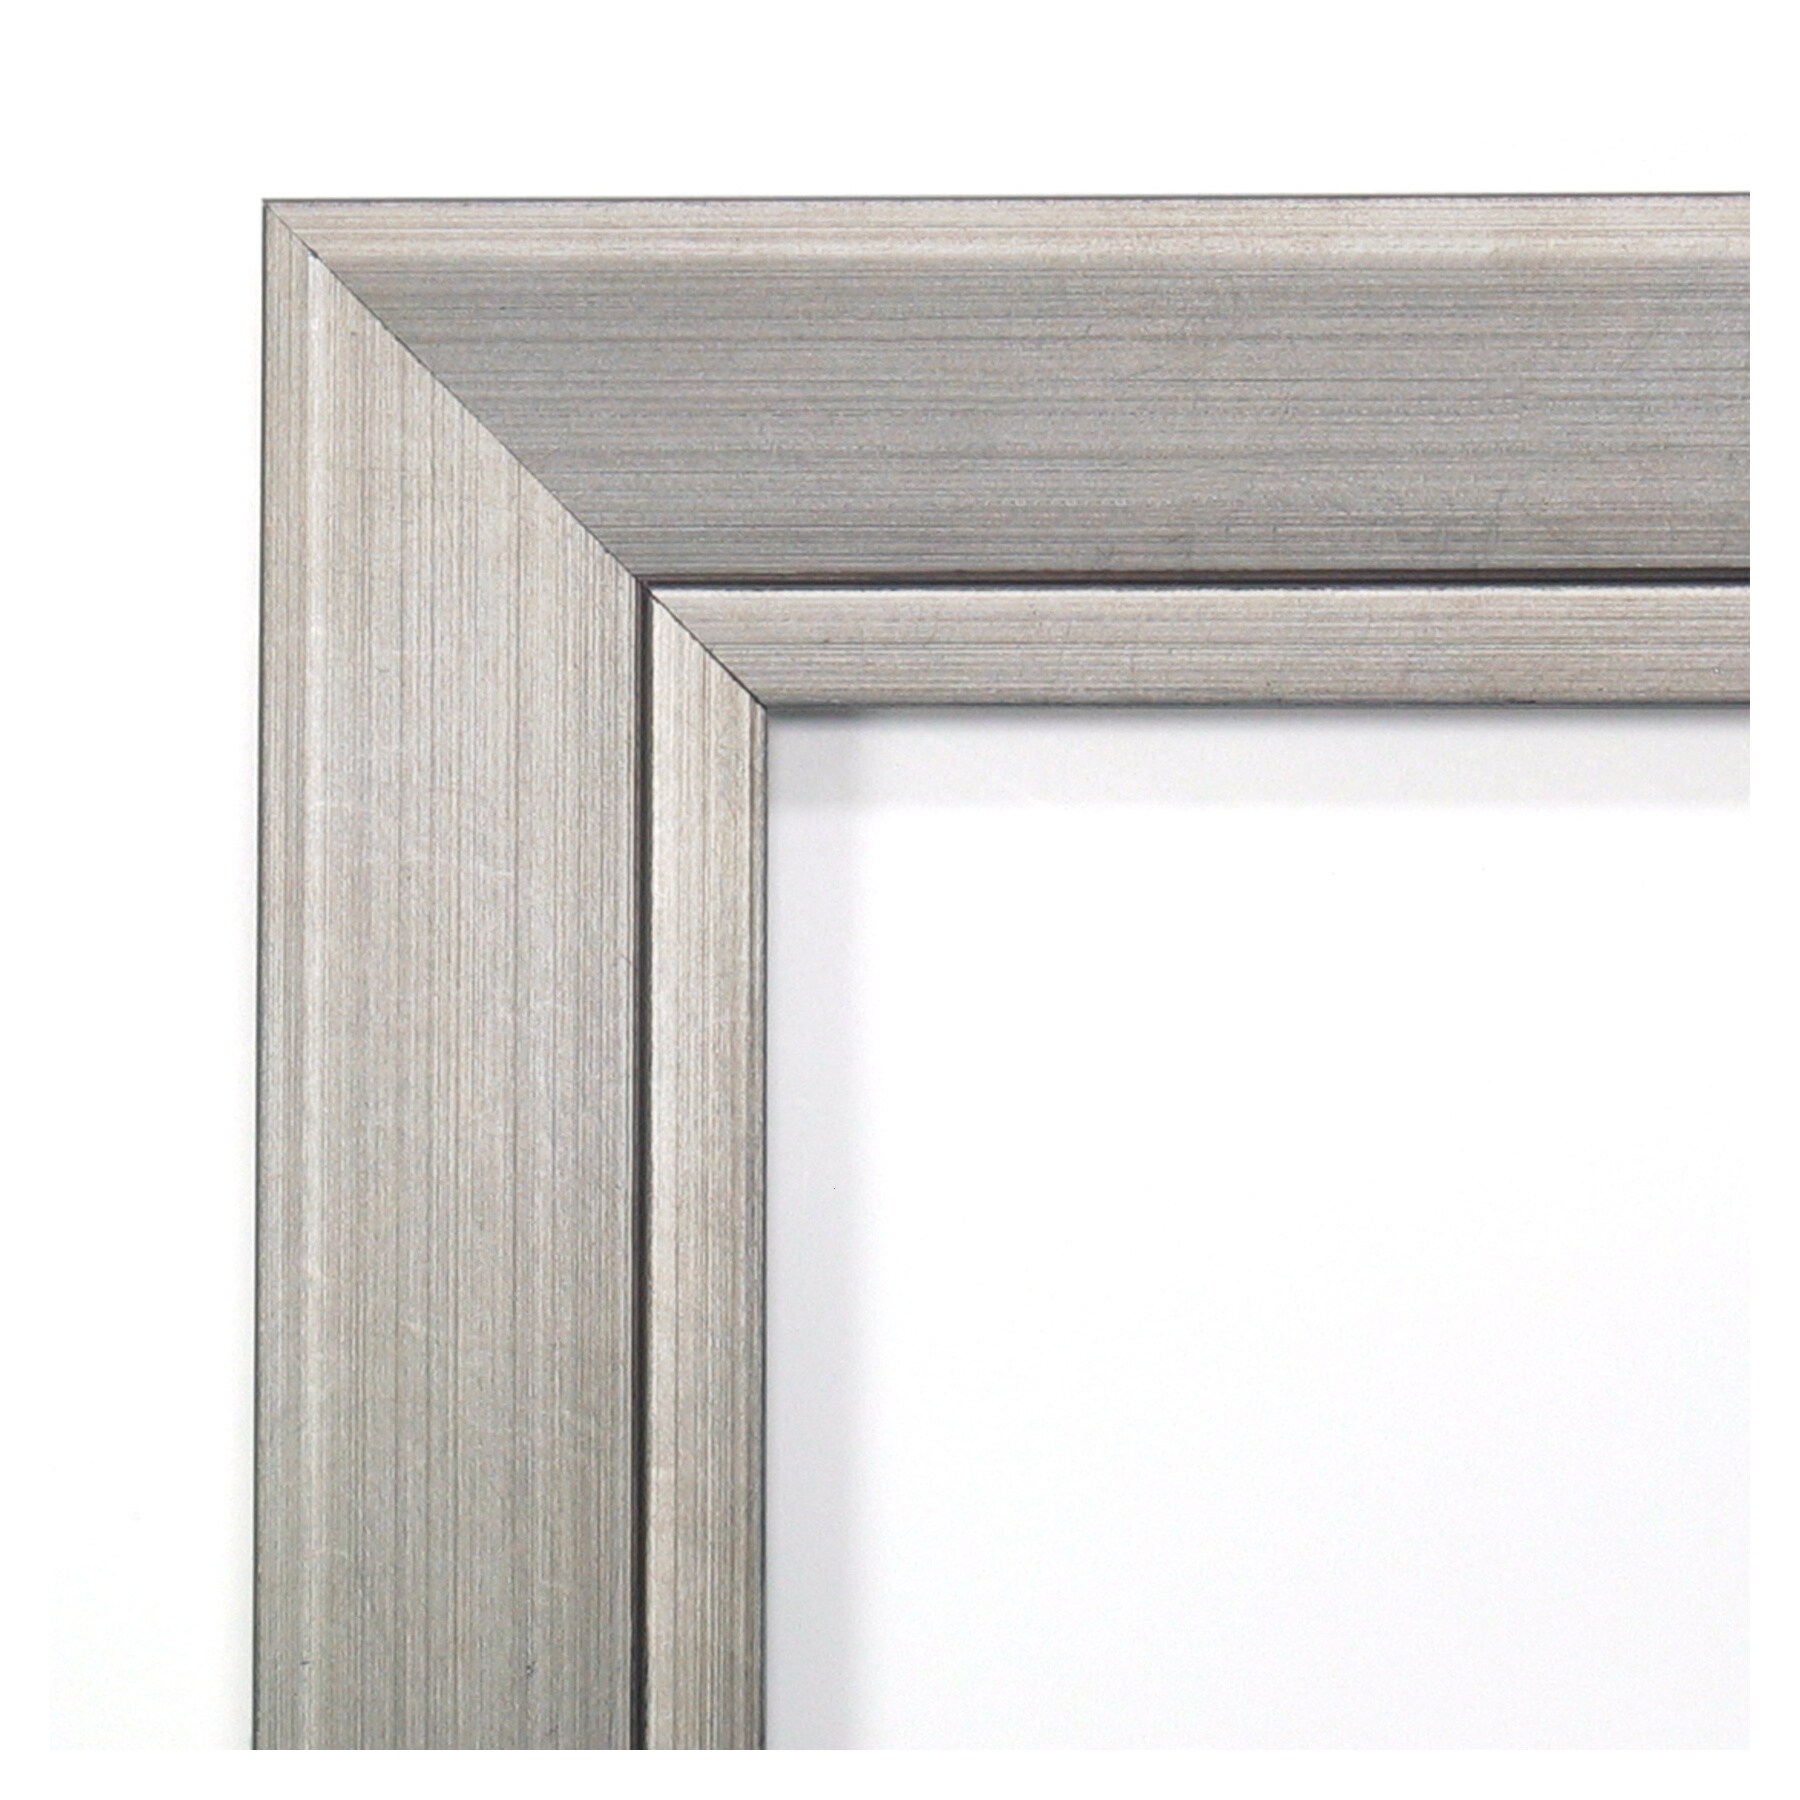 Amanti Art Romano Silver 31.75-in x 25.75-in Burnished Silver Framed ...